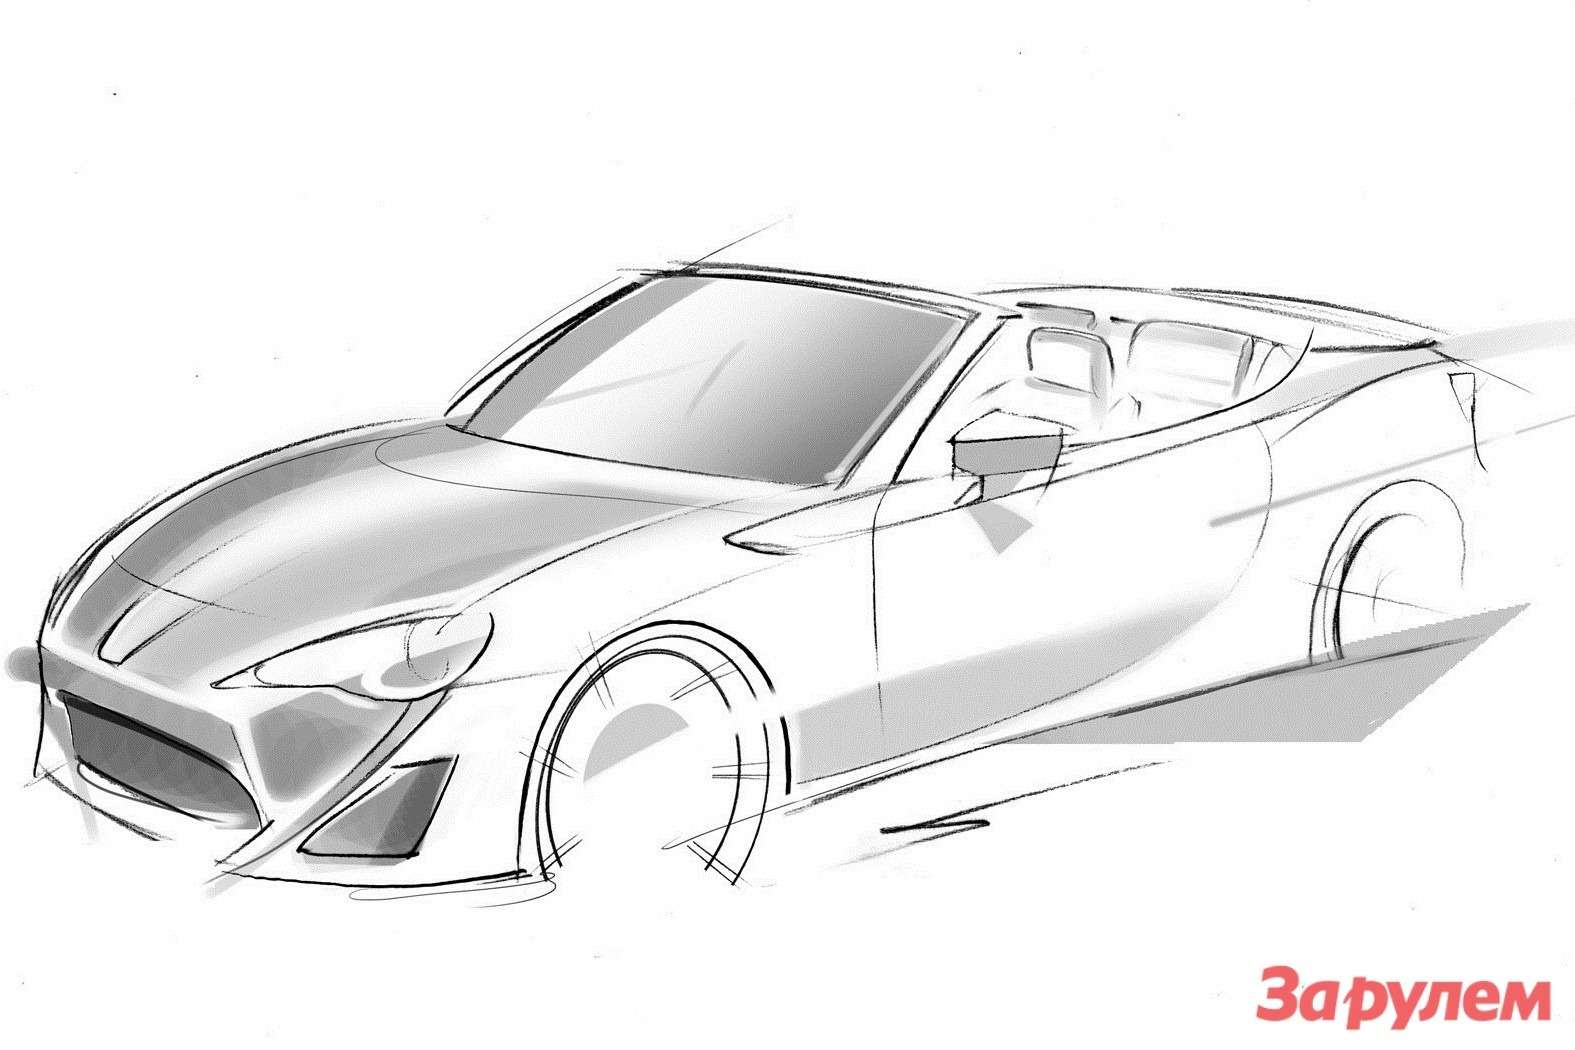 Toyota GT 86 Open Concept first sketch